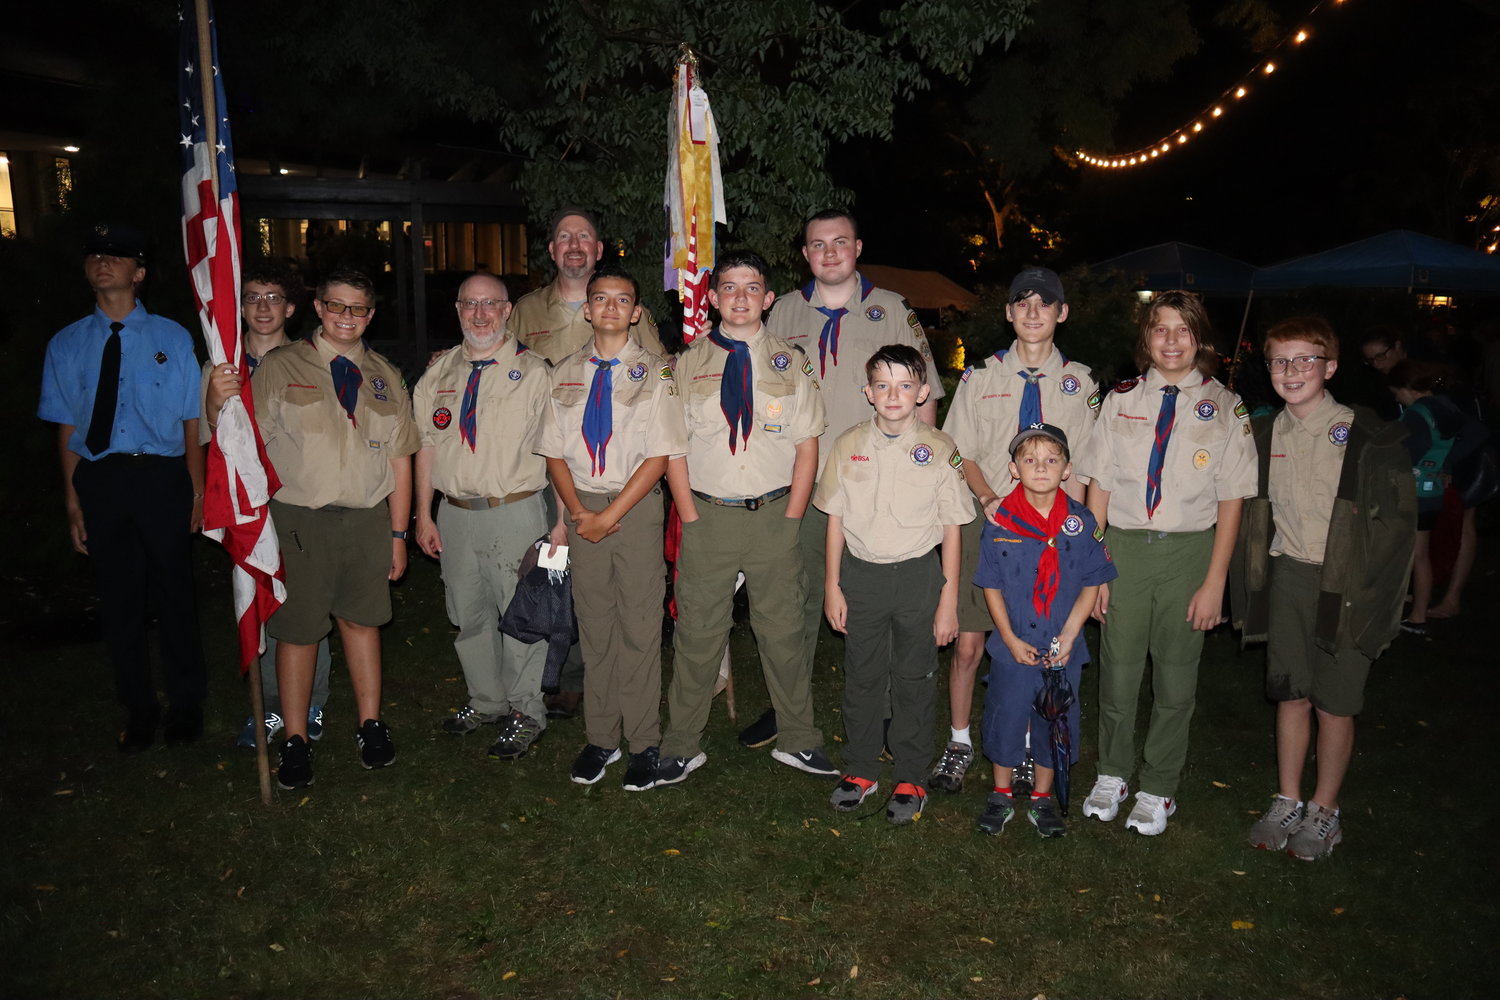 Boy Scout Troop 336 in Lynbrook pitched in to assist in setting up for the 9/11 ceremony on Sunday night.